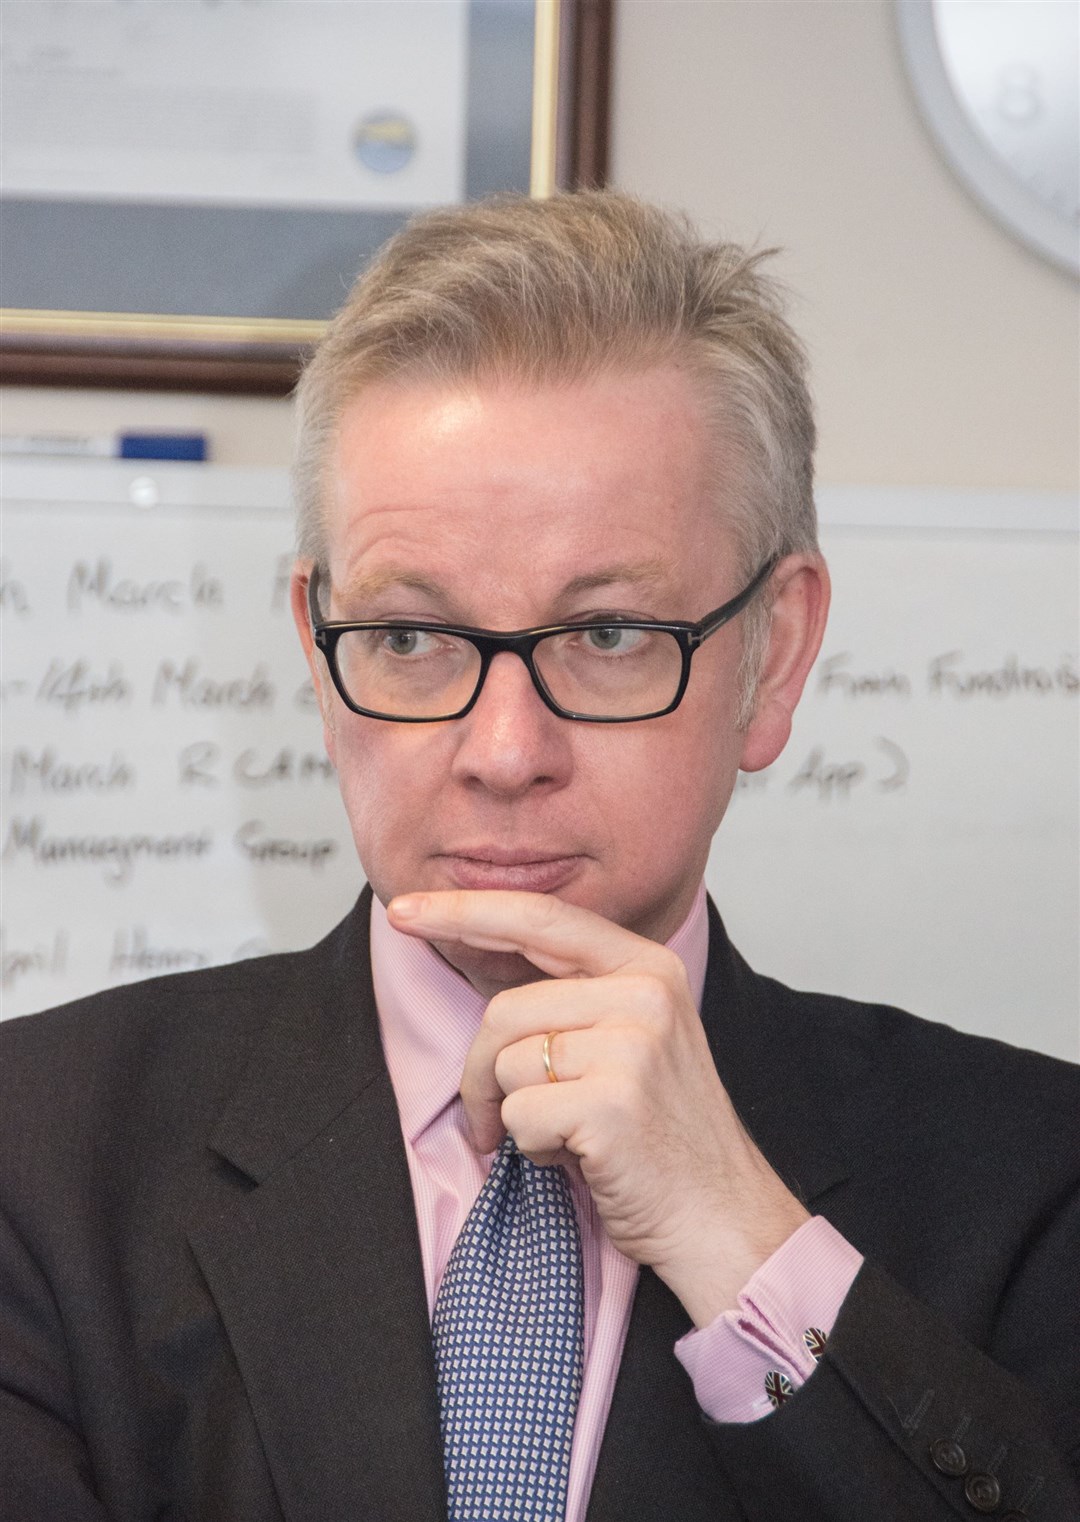 Cabinet office minister Michael Gove.